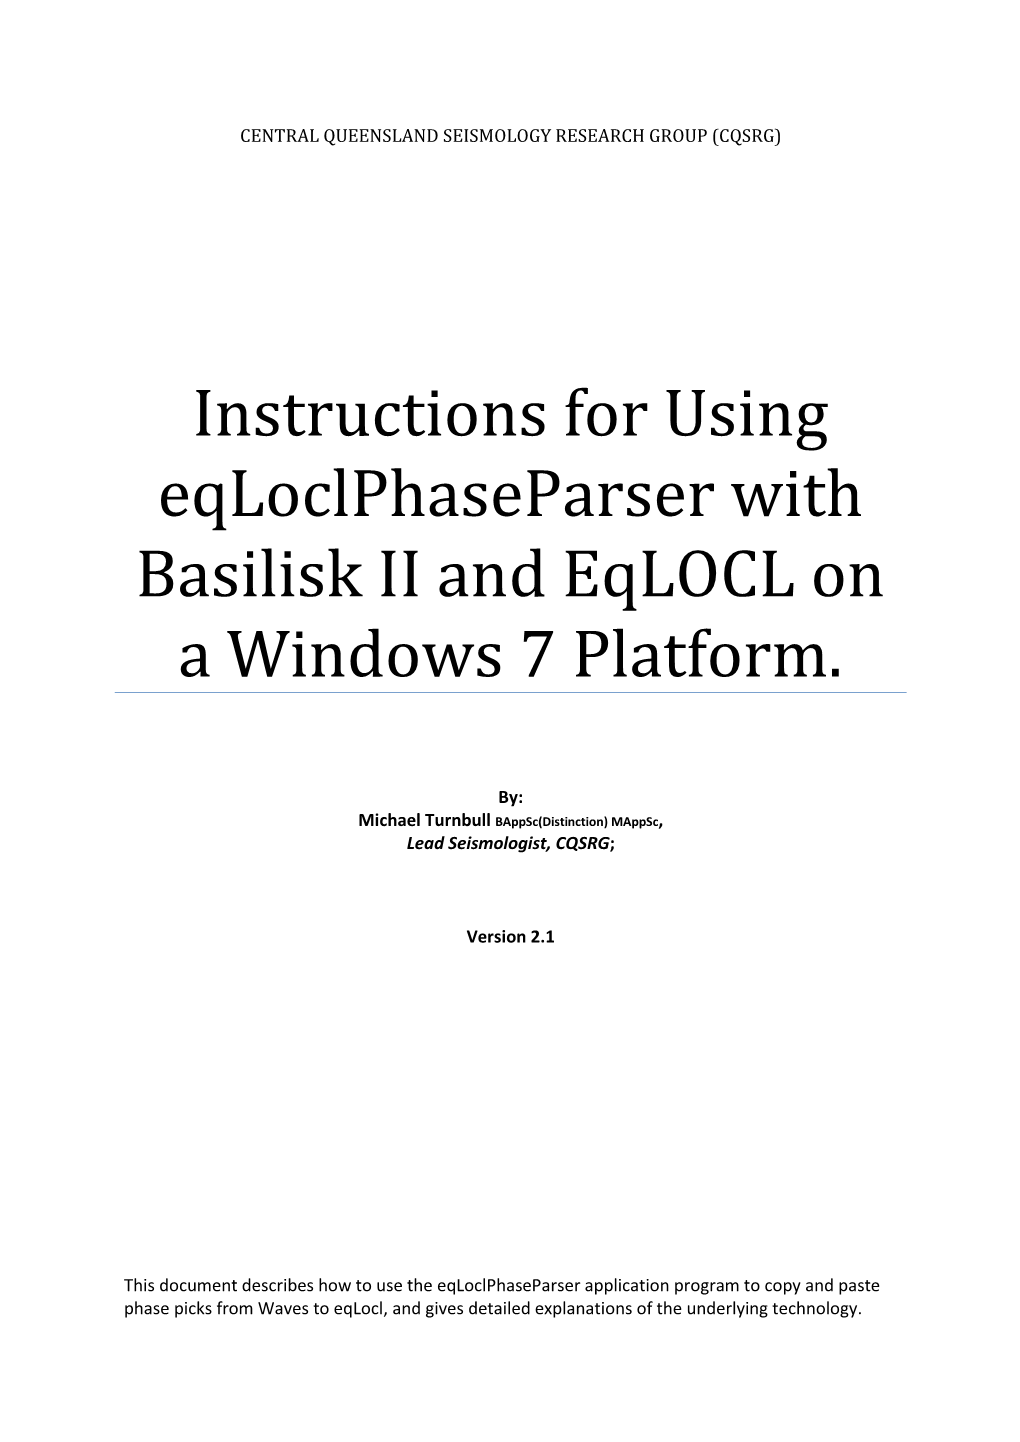 Instructions for Using Eqloclphaseparser with Basilisk II and Eqlocl on a Windows 7 Platform